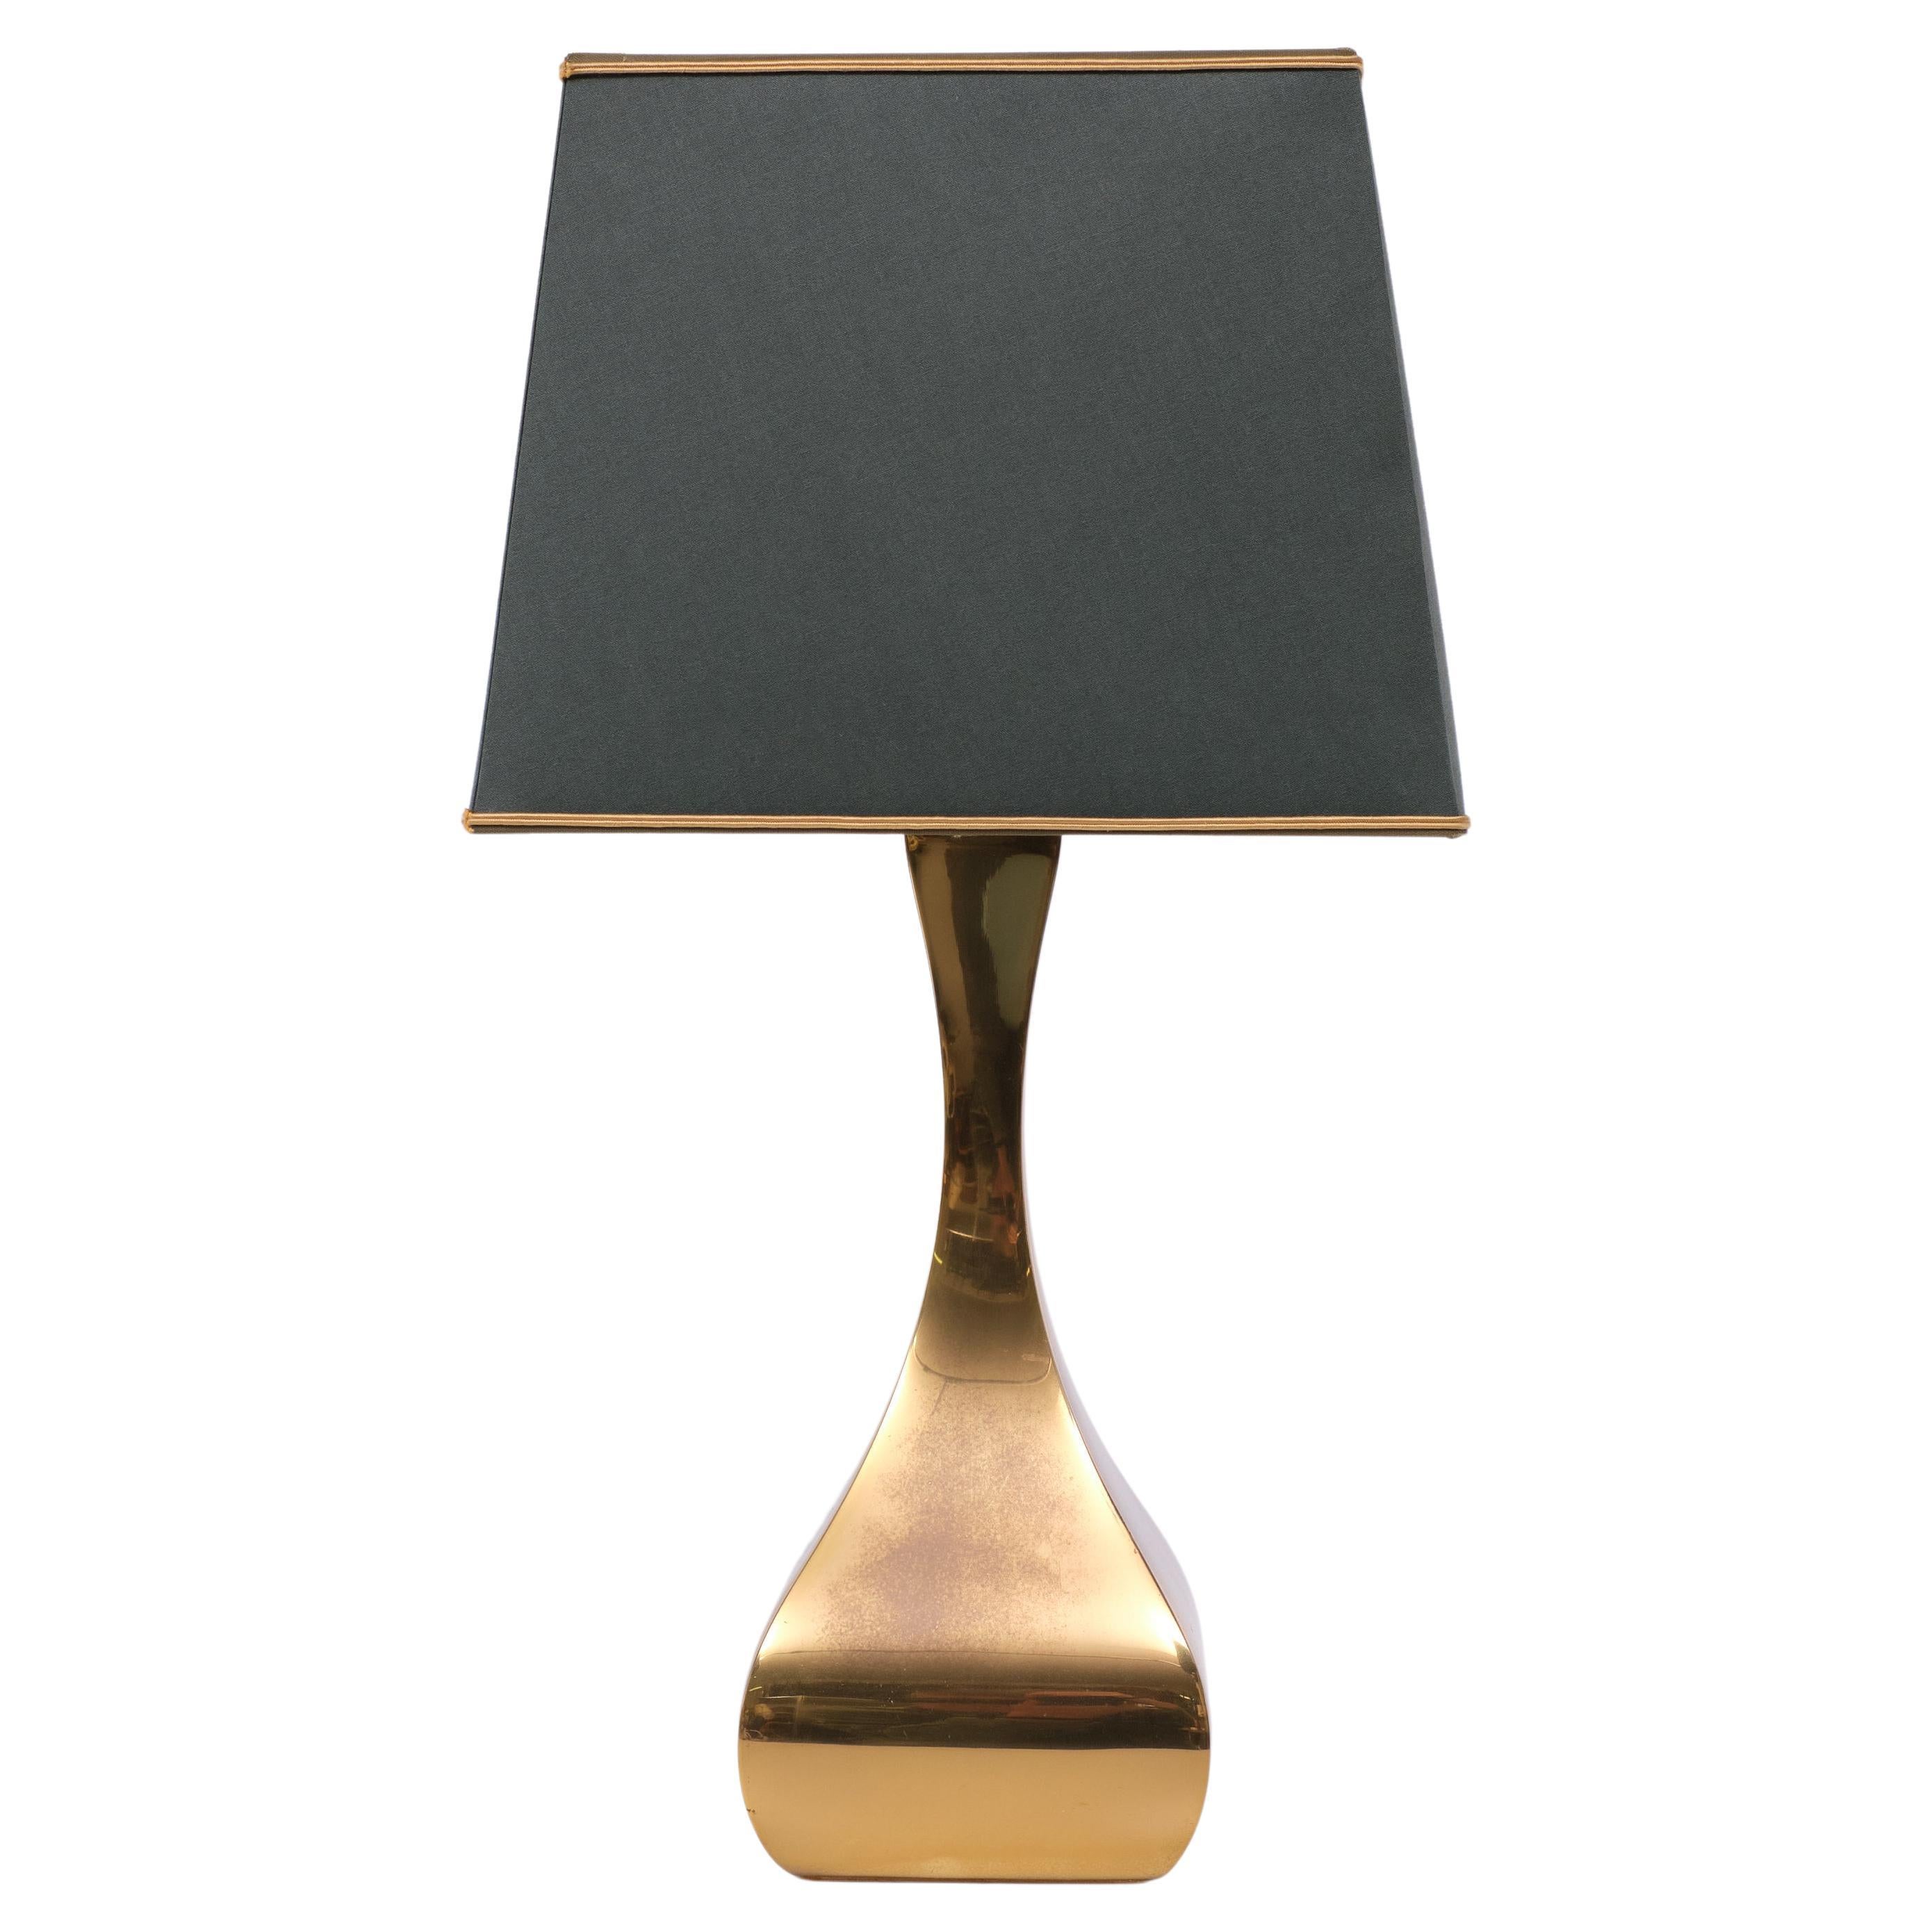  Very nice brass table lamp .organic shaped . Beautiful patine . good quality heavy piece ,
comes with a square green shade ,Gold inside . Great looking . One large E27 bulb needed 